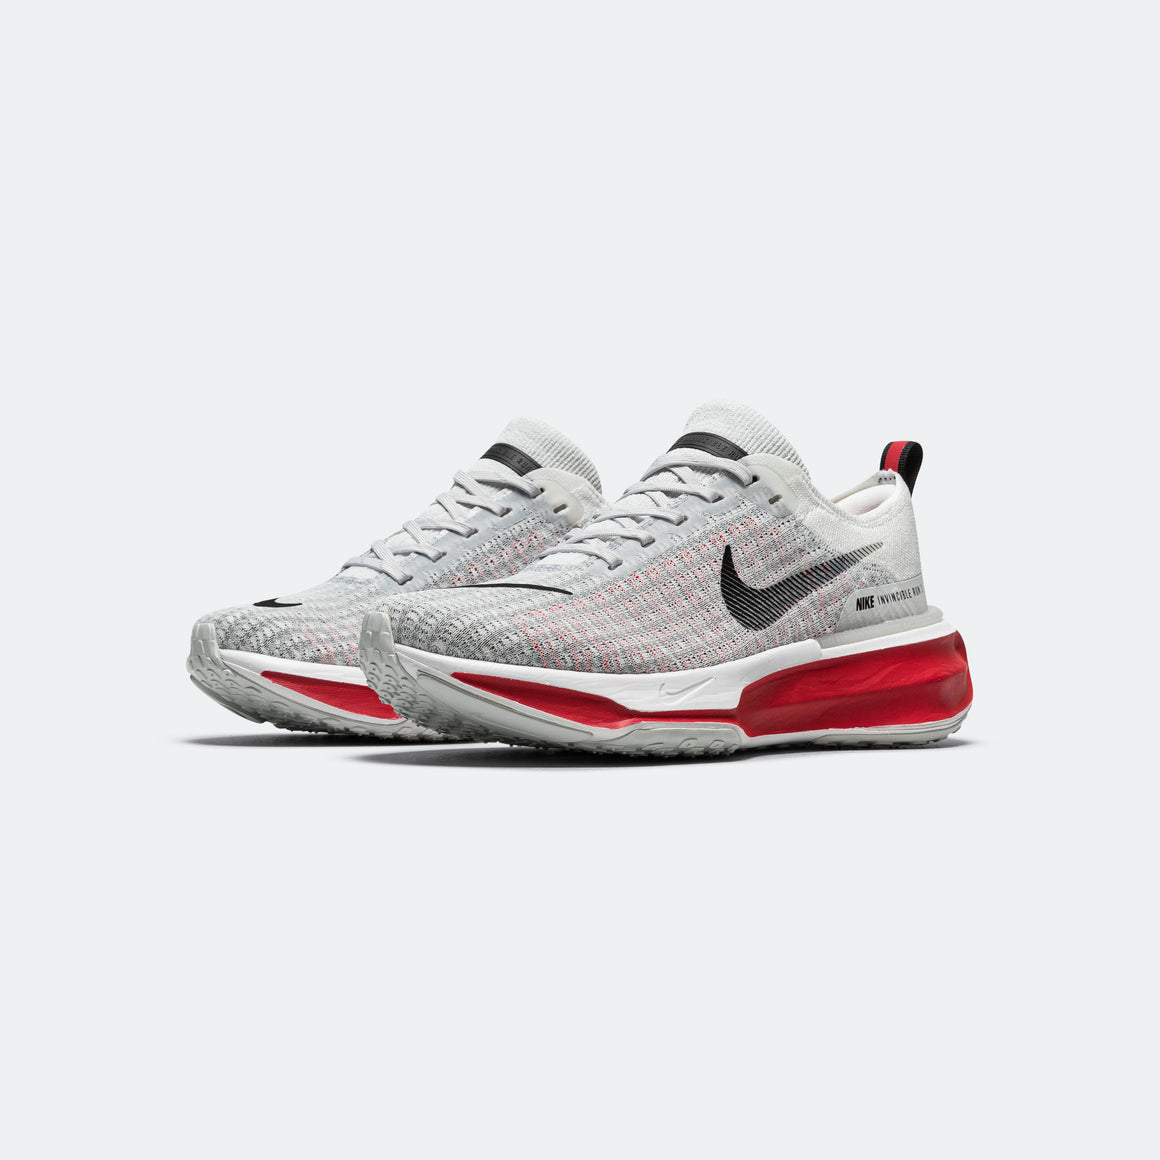 Nike - Mens ZoomX Invincible Run FK 3 - White/Black-Fire Red-Cement Grey - Up There Athletics